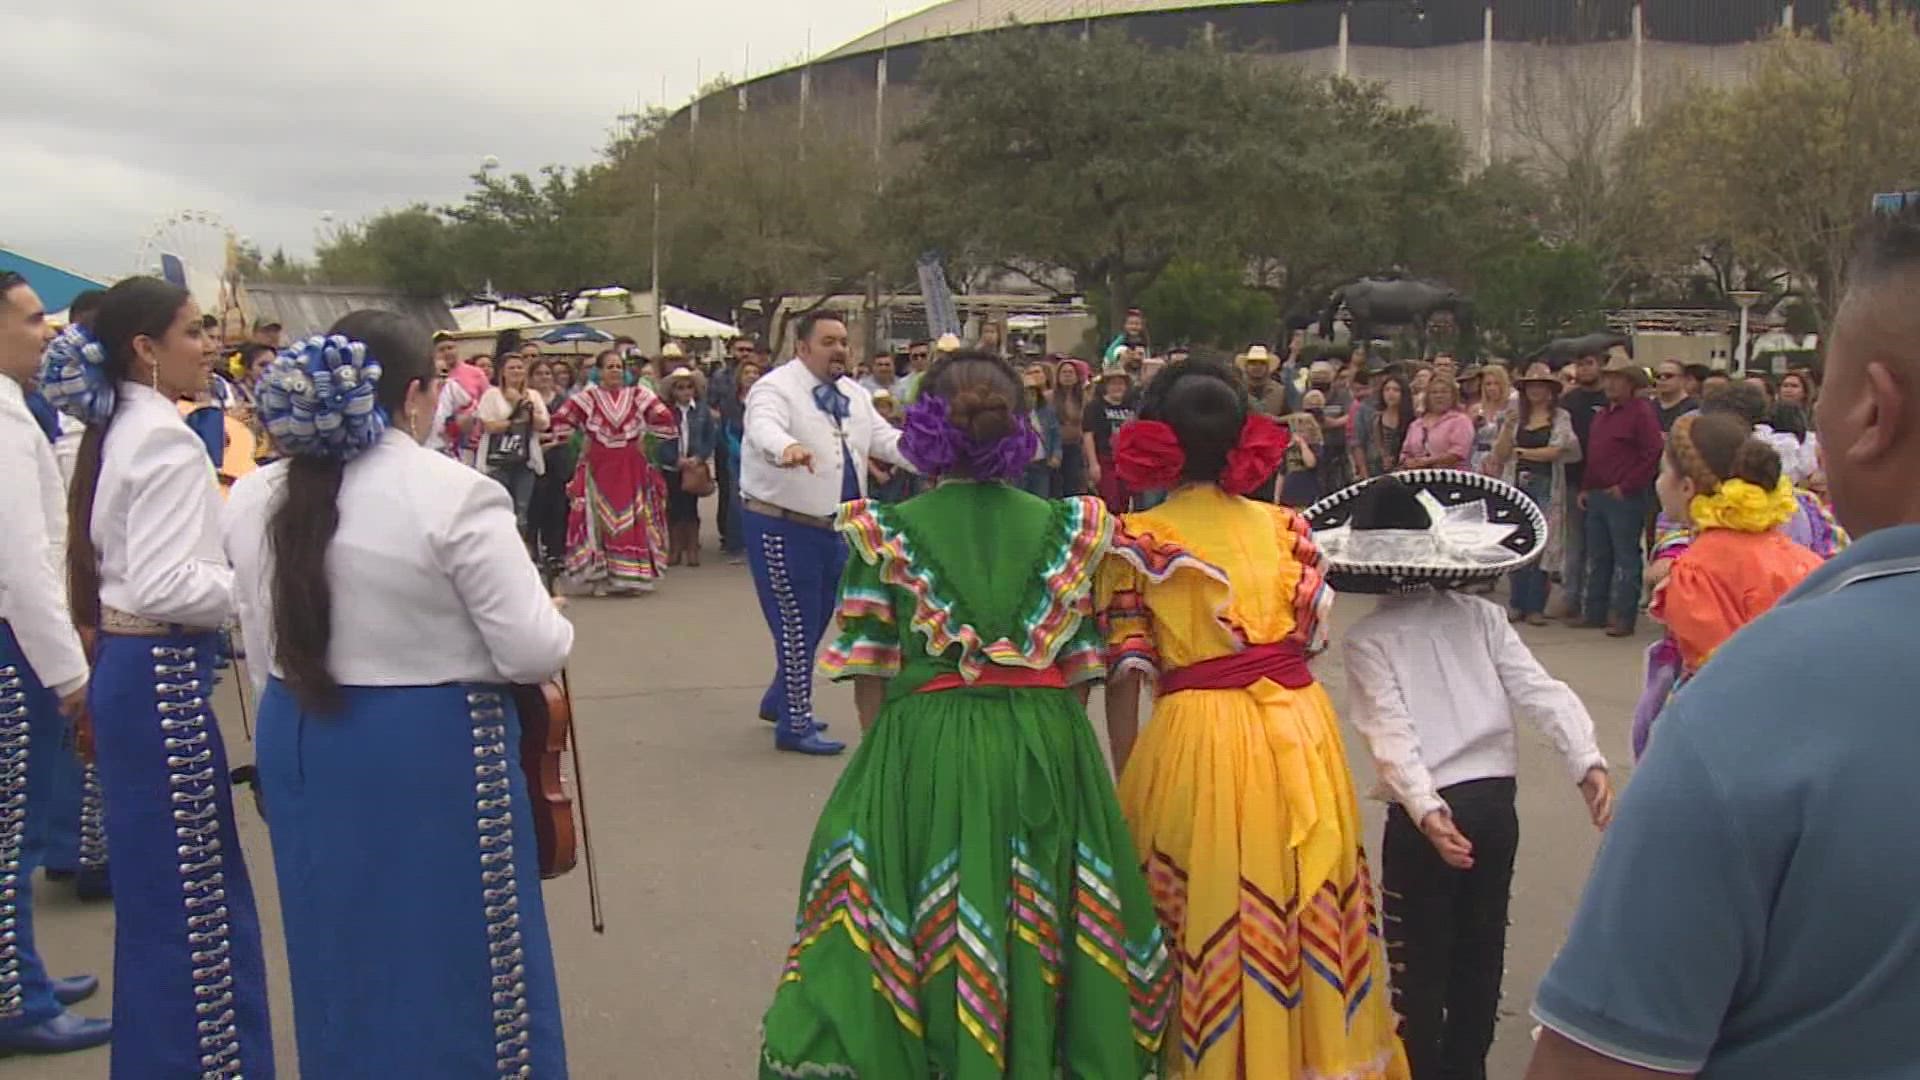 The day has become one of the Houston Livestock Show and Rodeo's most well attended.